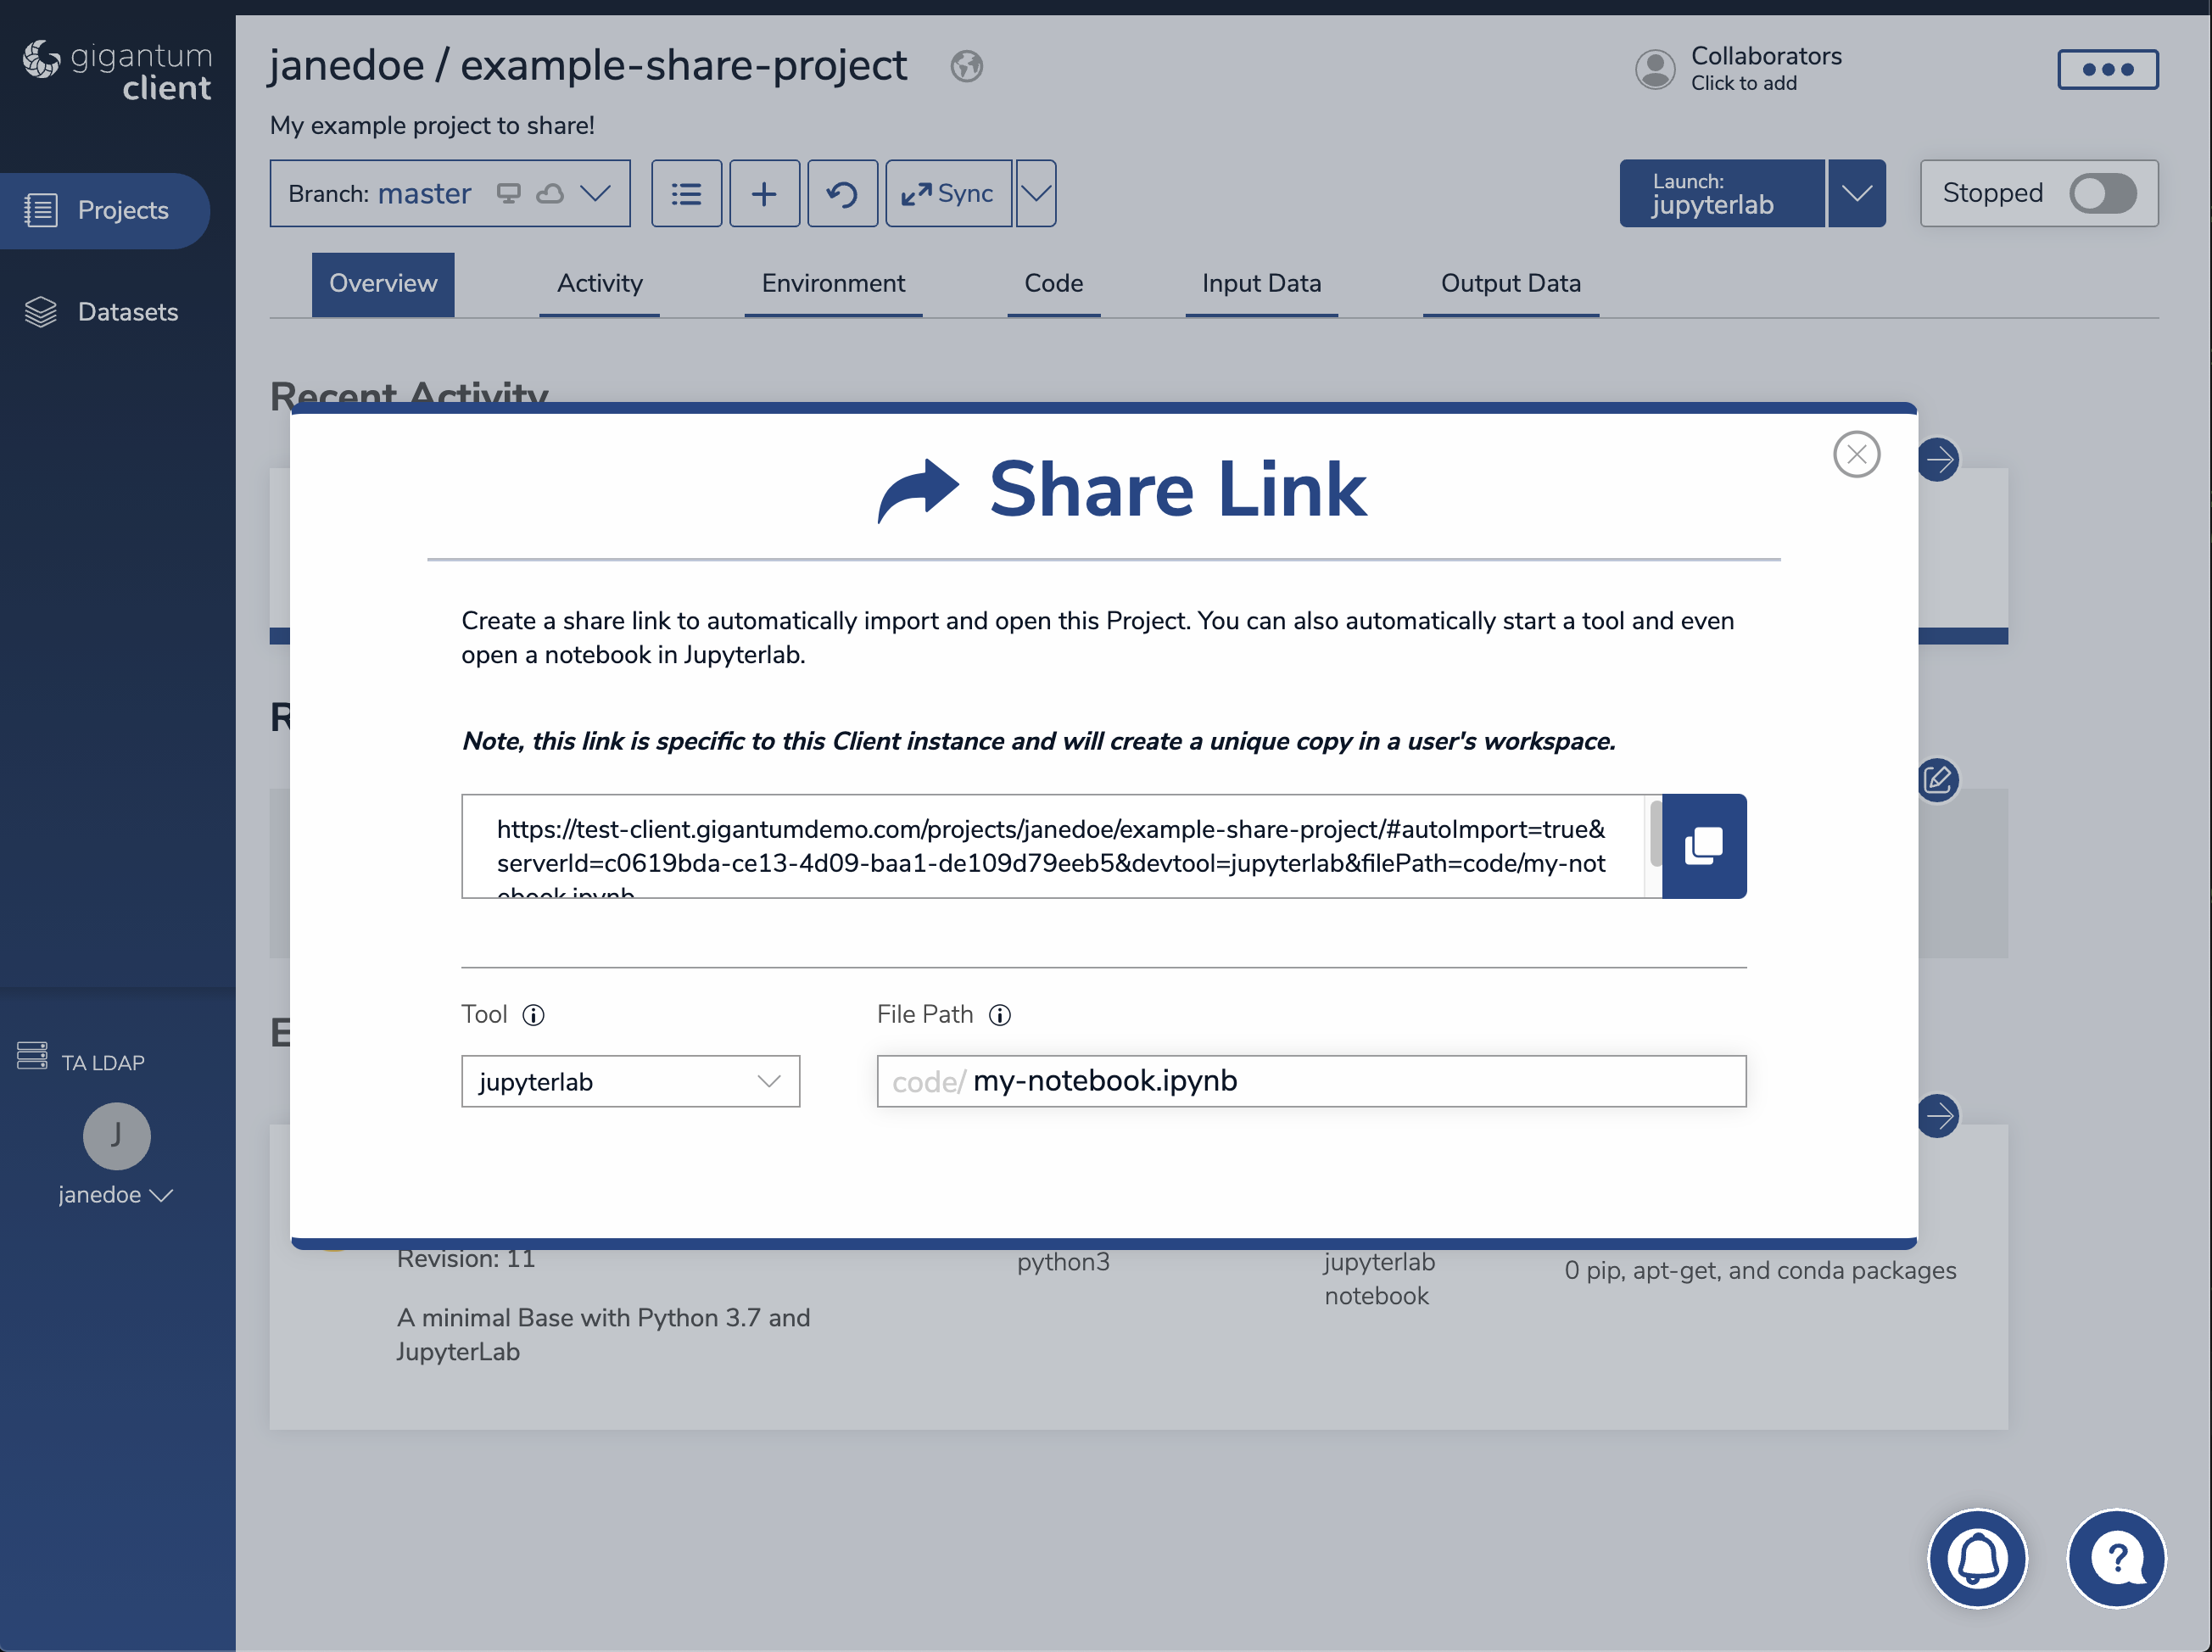 Use the share link modal to generate a shareable link.